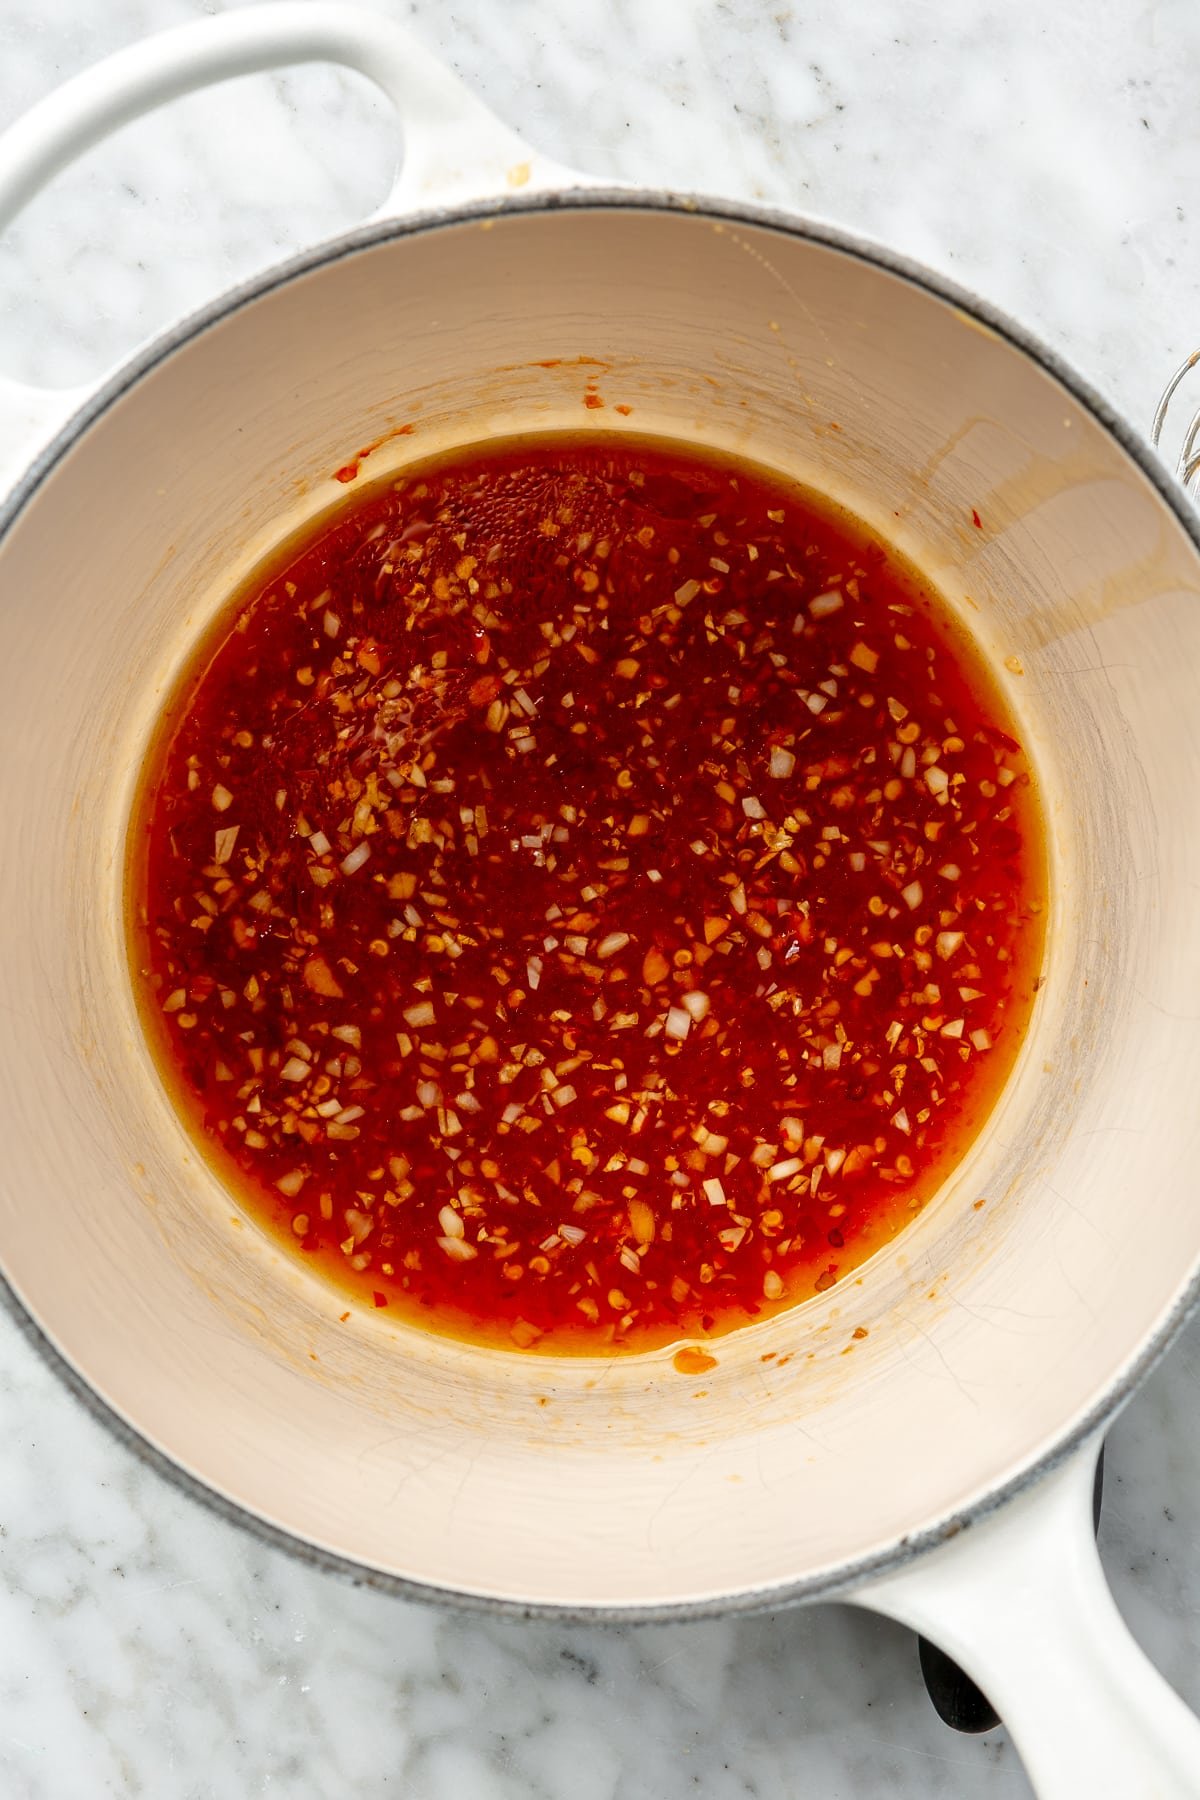 A variety of ingredients and a red sauce are shown in a non stick, stovetop pan after mixing.